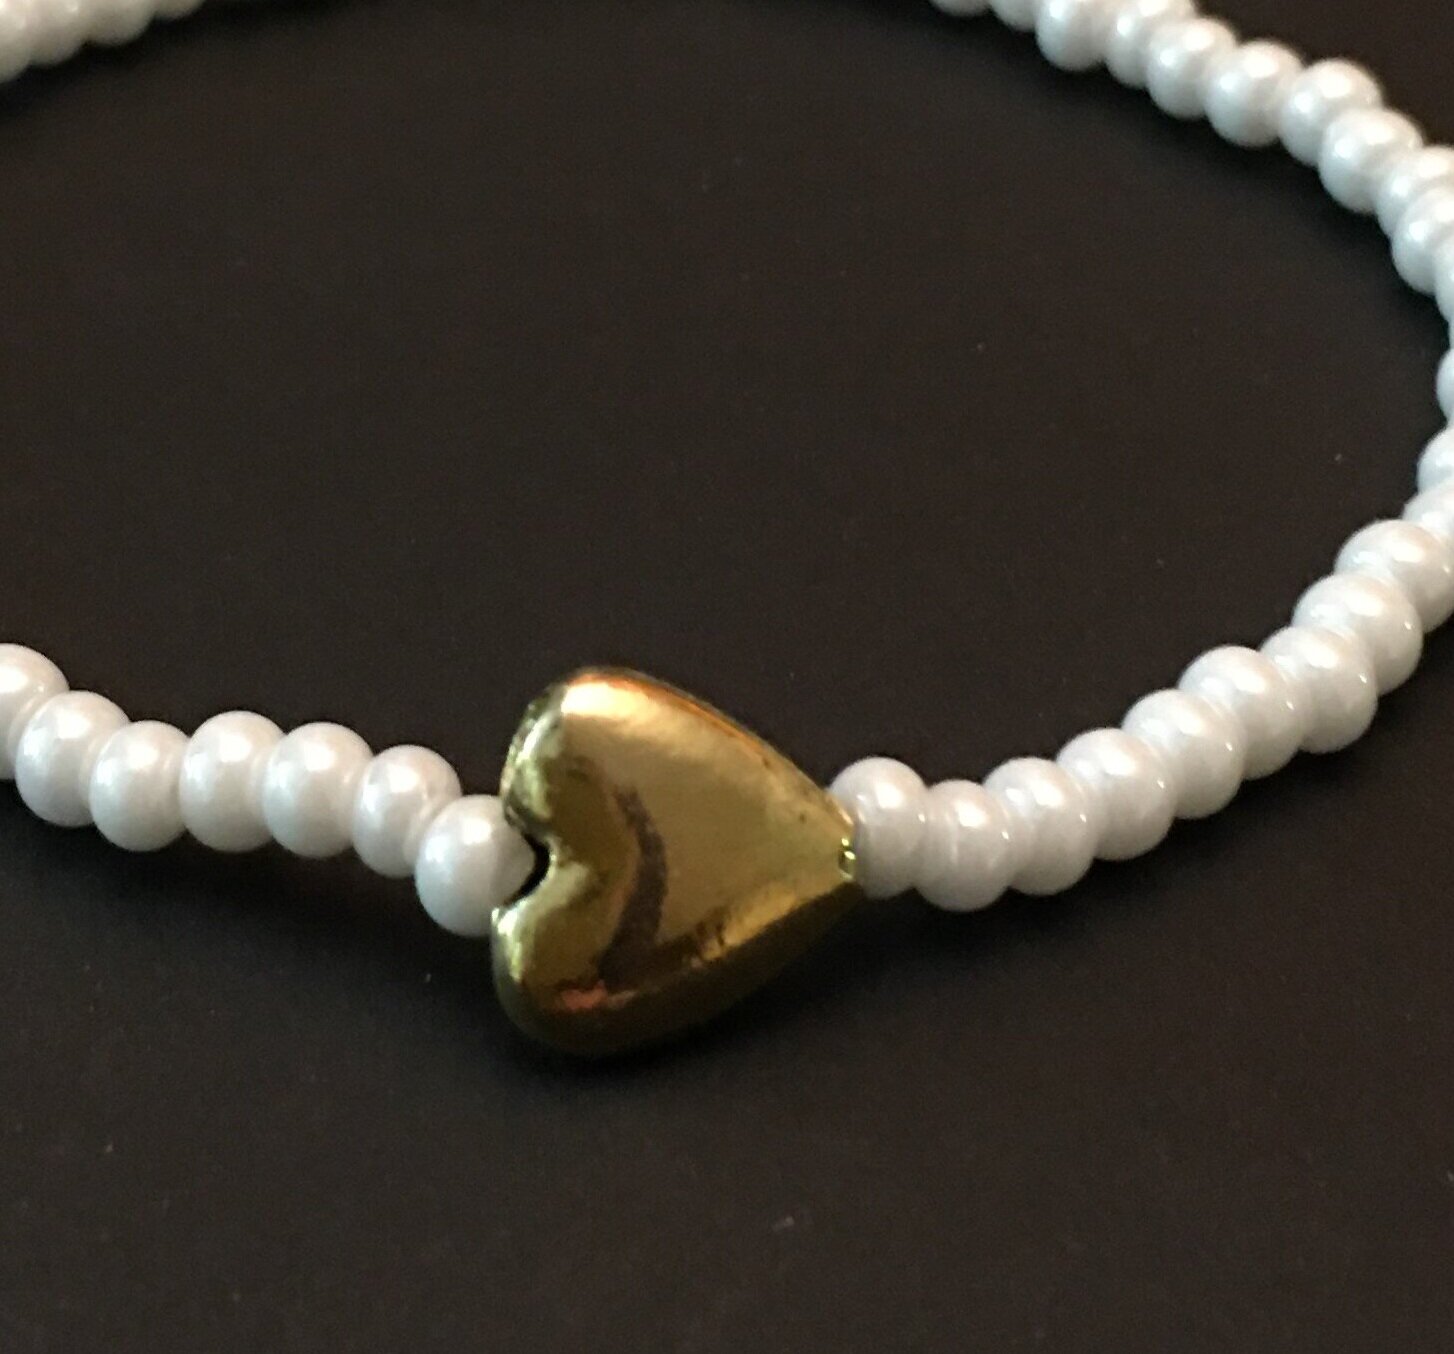 Heart Shiny Antiqued Brass on Pure White Pearlized Czech Glass- Elegant - Low Tide Island Designs